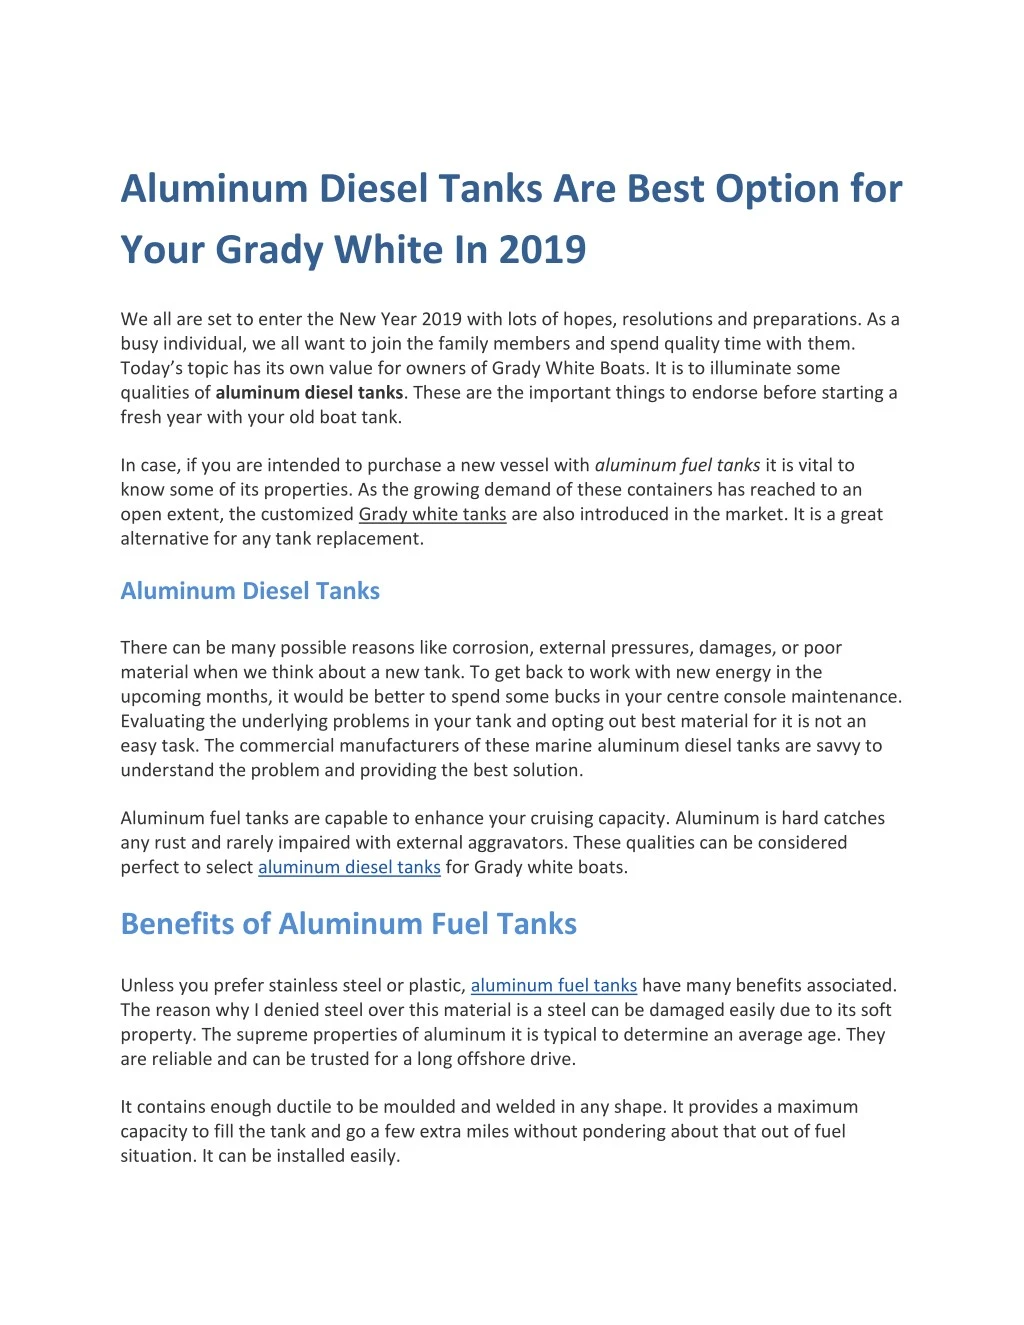 aluminum diesel tanks are best option for your